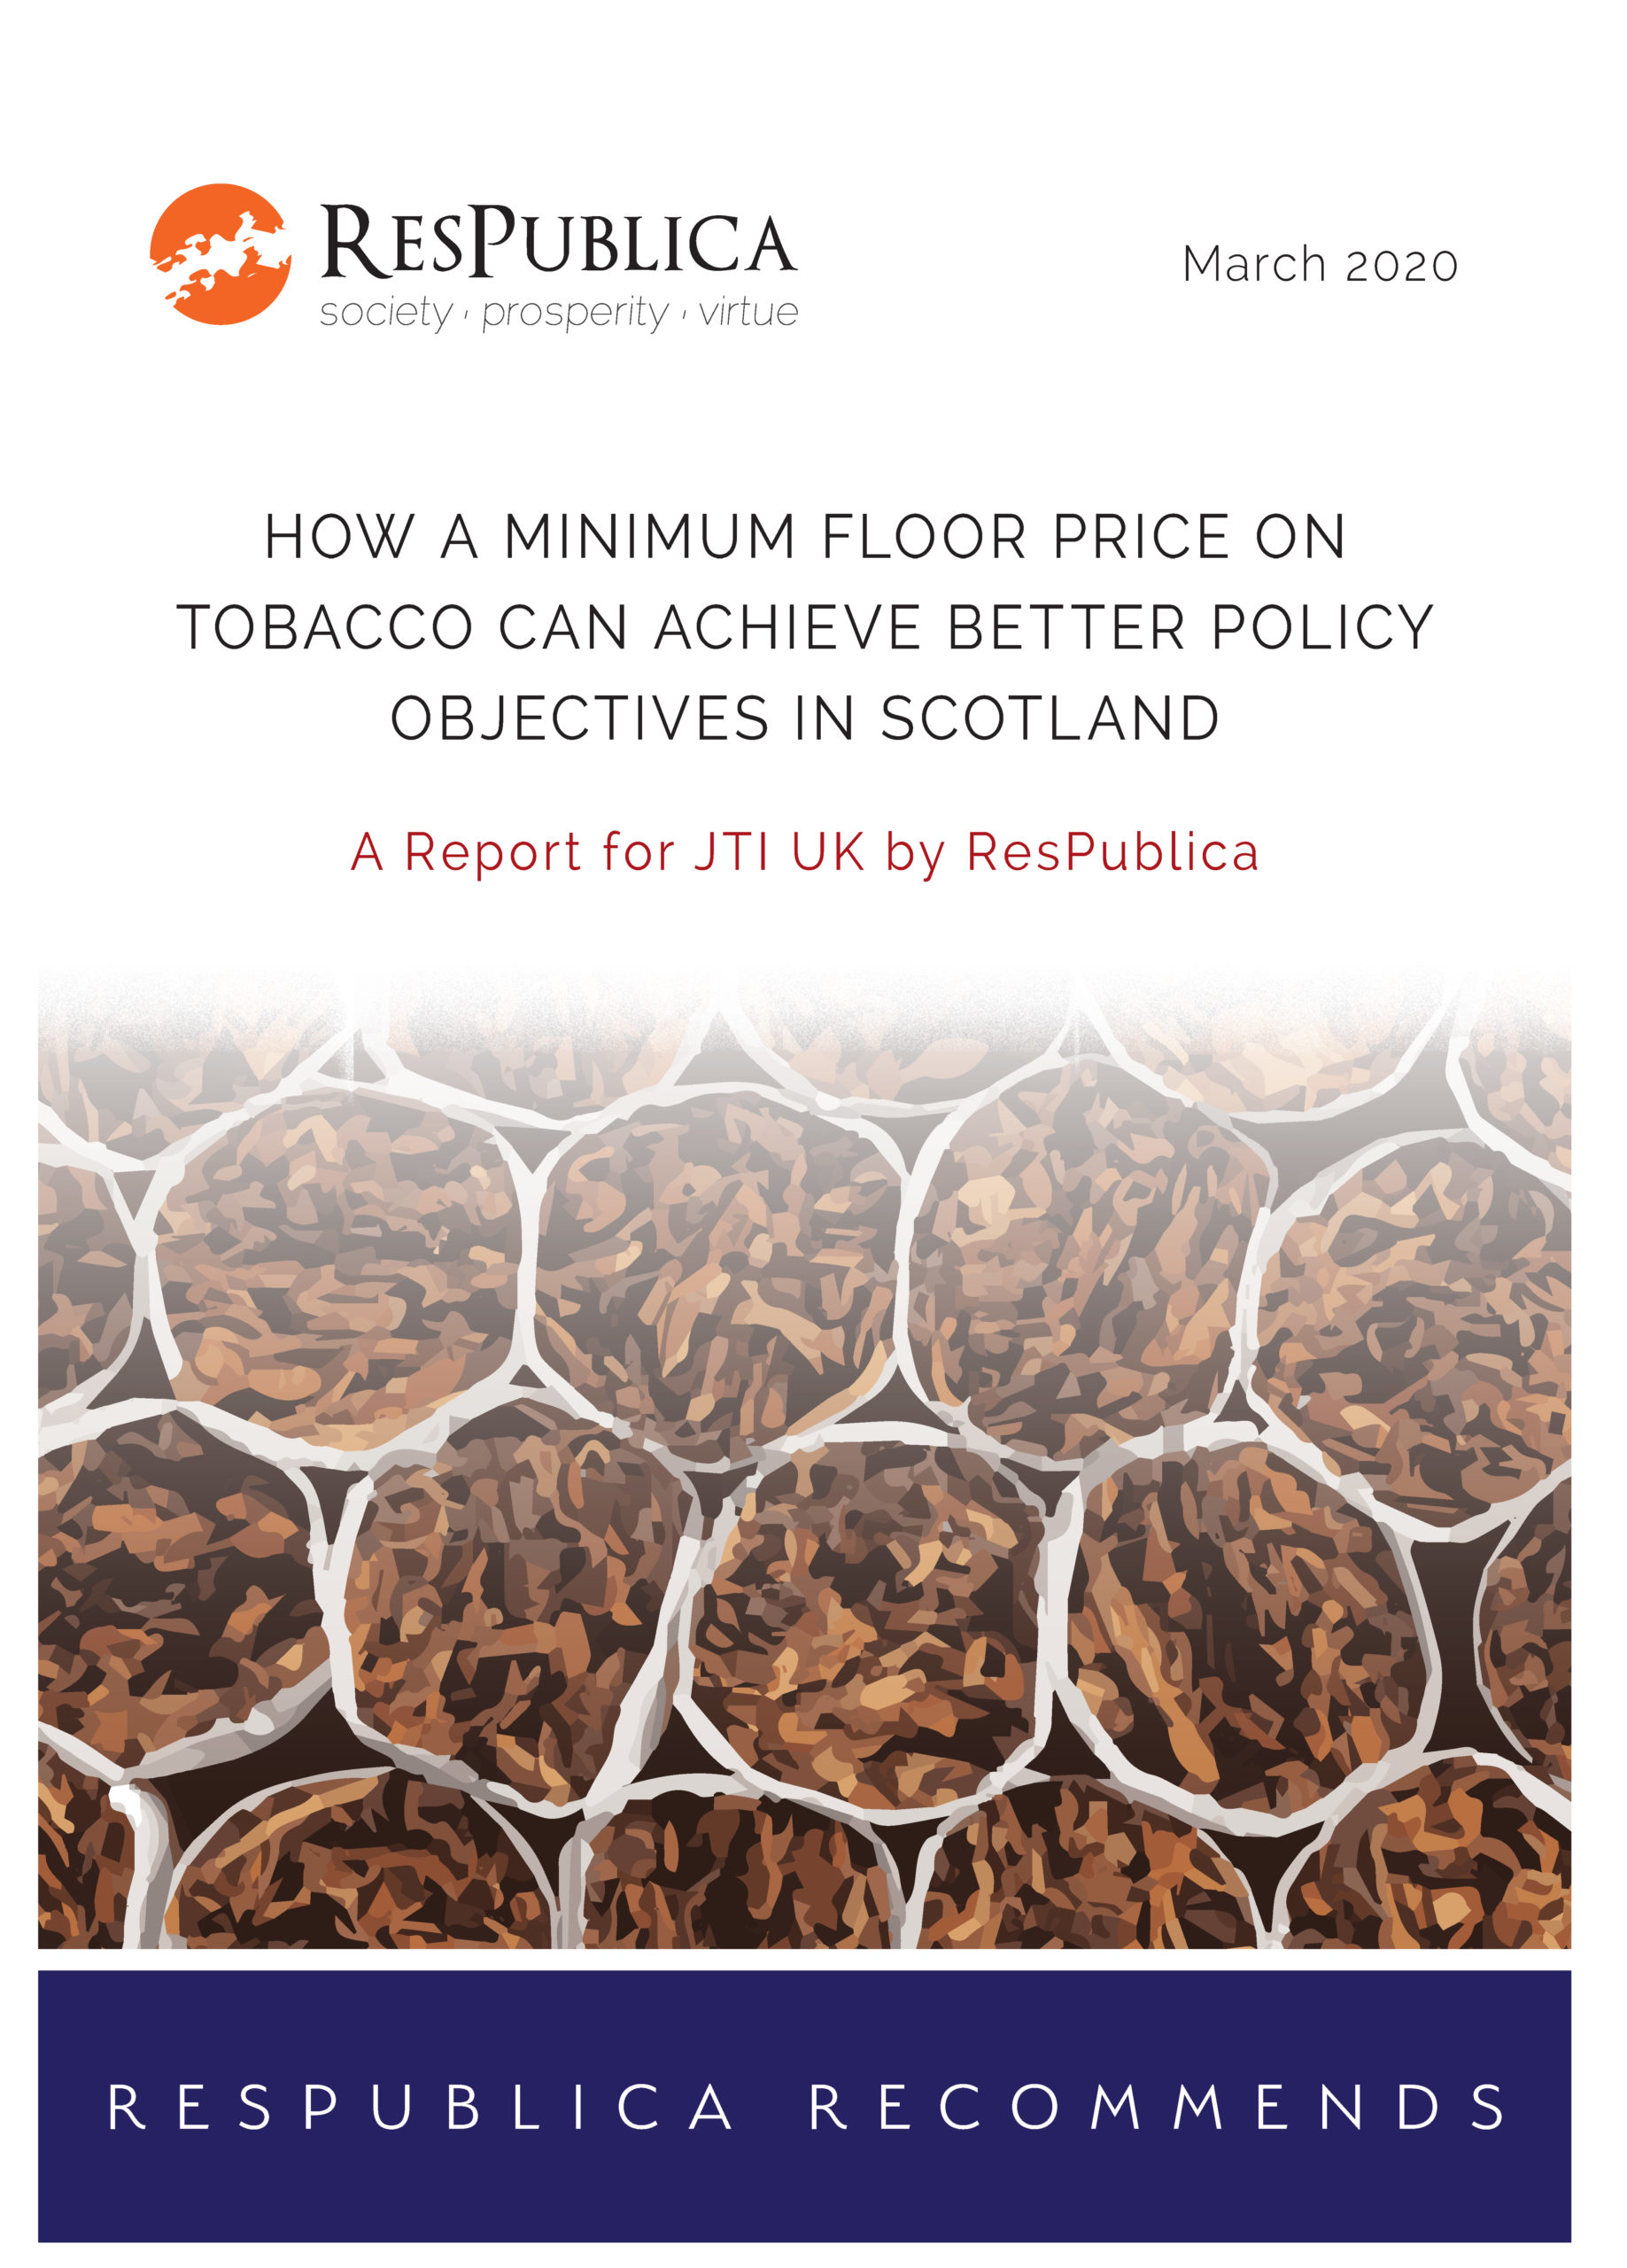 How a Minimum Floor Price on tobacco can achieve better policy objectives in Scotland